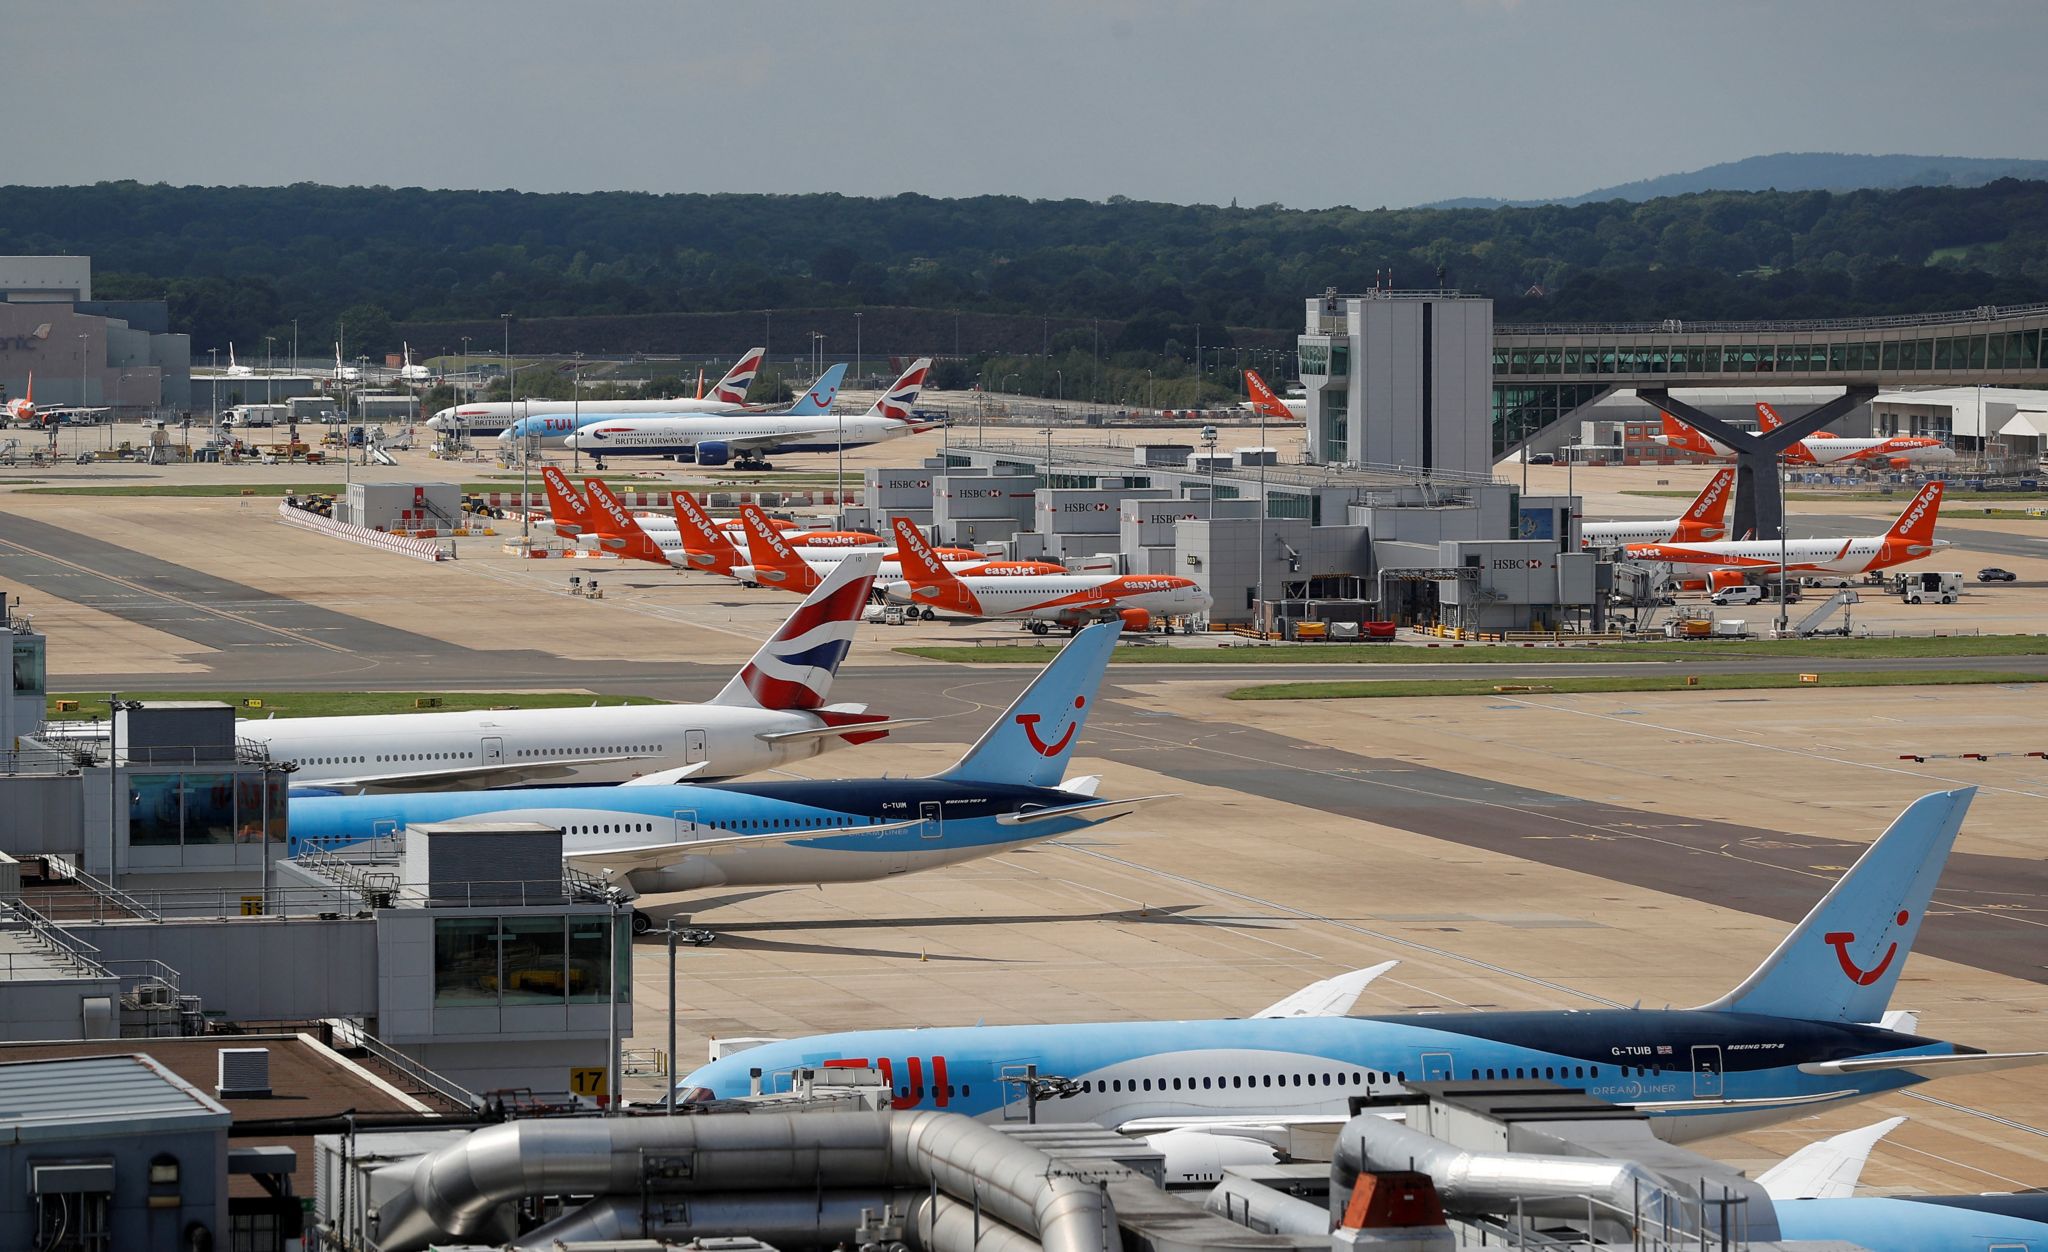 British Airways, Easyjet and TUI aircraft are parked at the South Terminal at Gatwick Airport